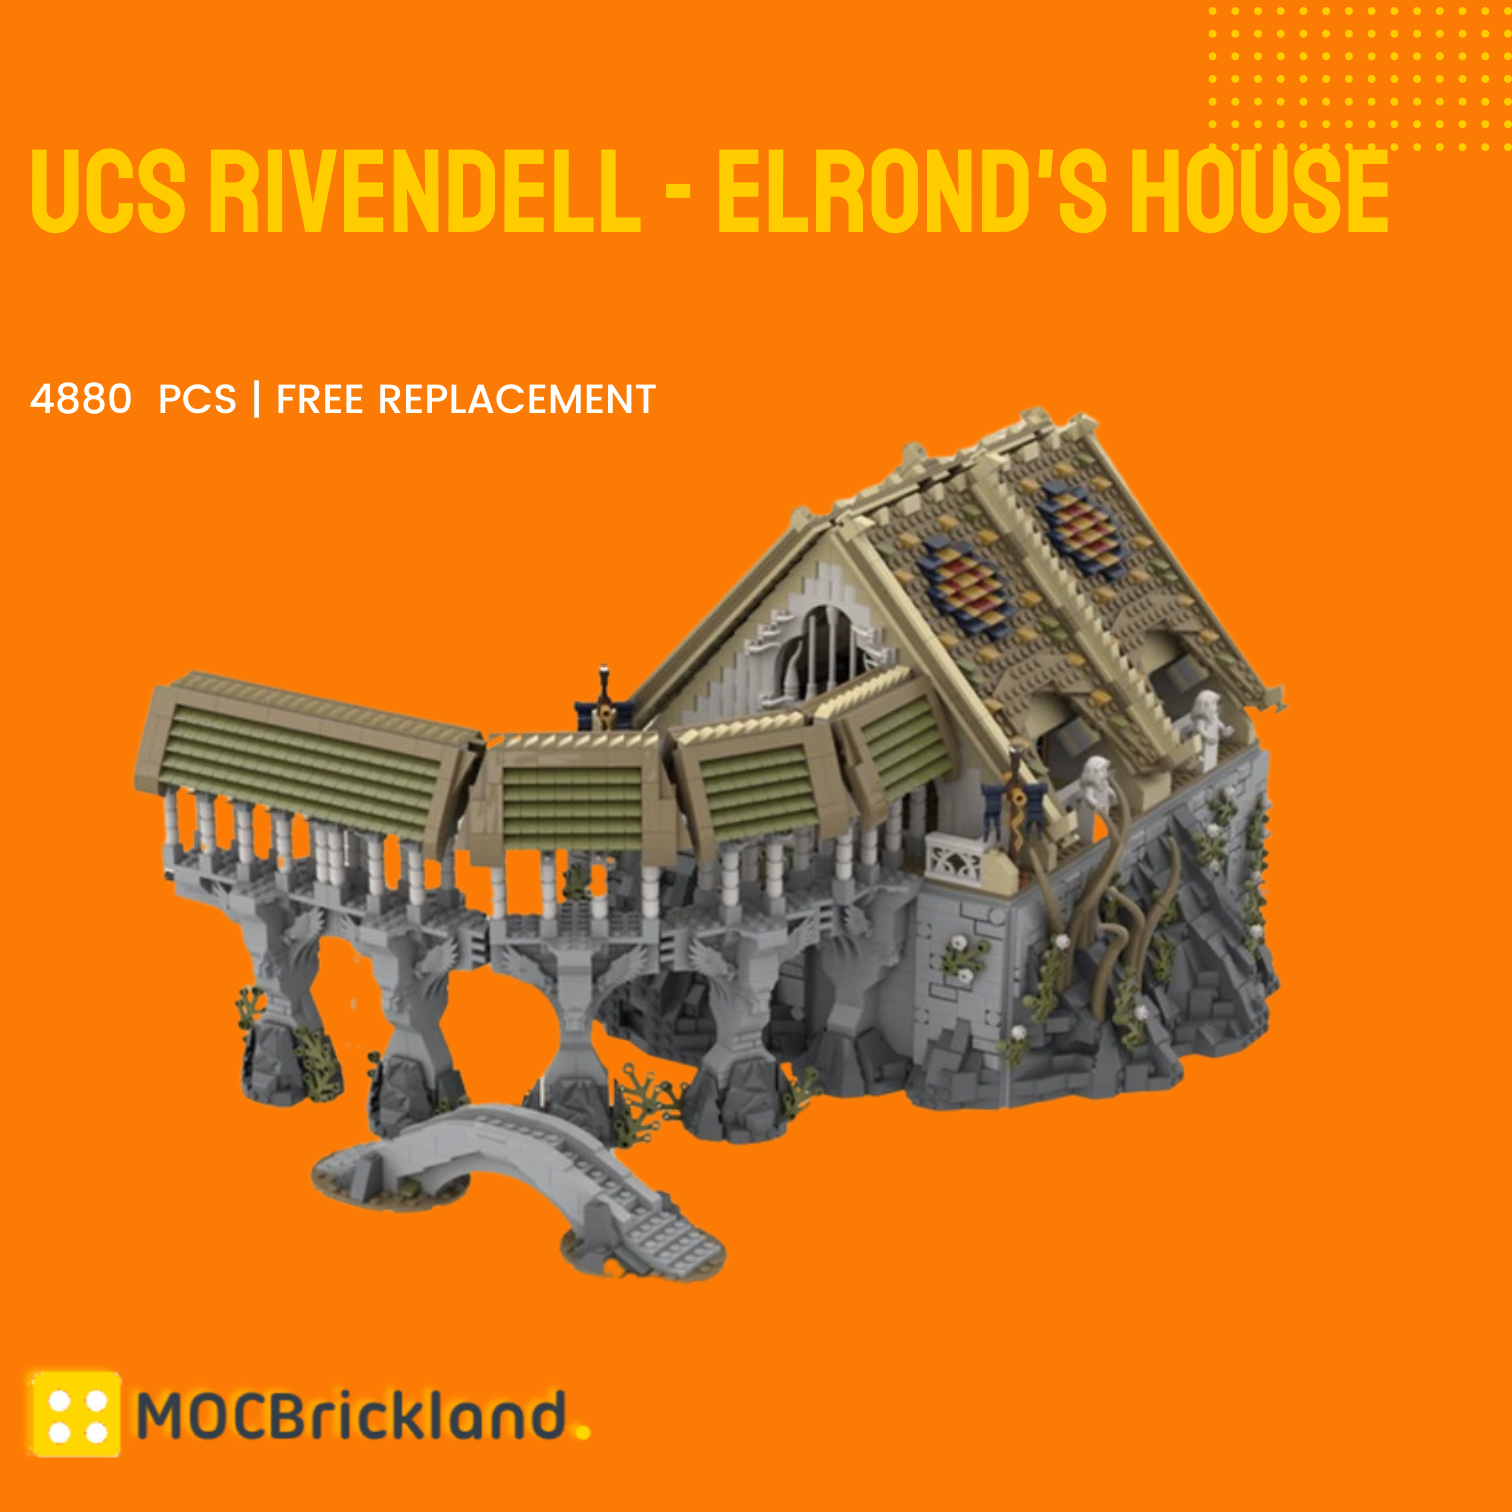 UCS Rivendell - Elrond's House MOC-47246 Modular Building With 4880 Pieces